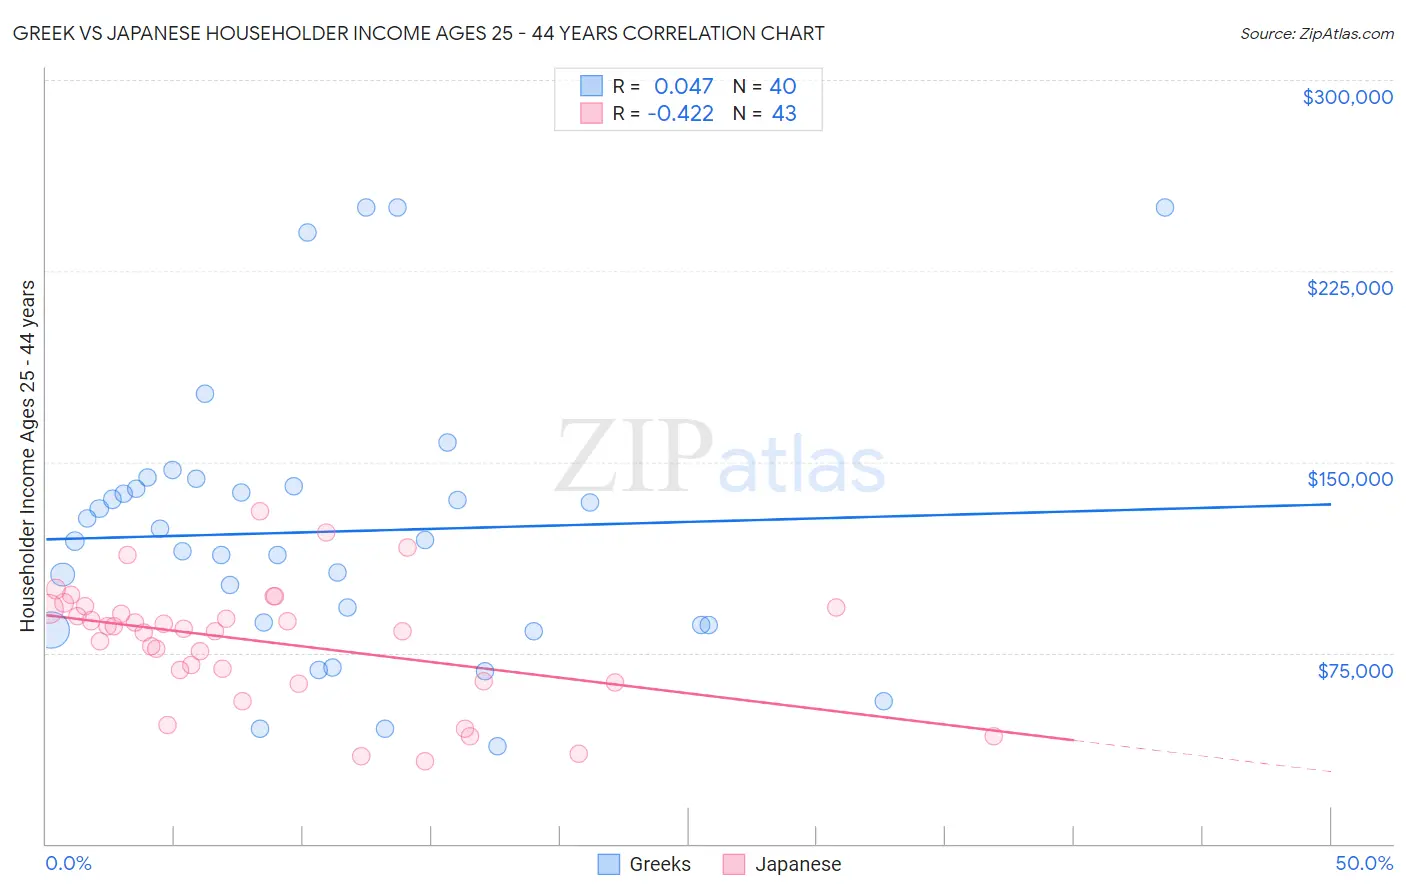 Greek vs Japanese Householder Income Ages 25 - 44 years